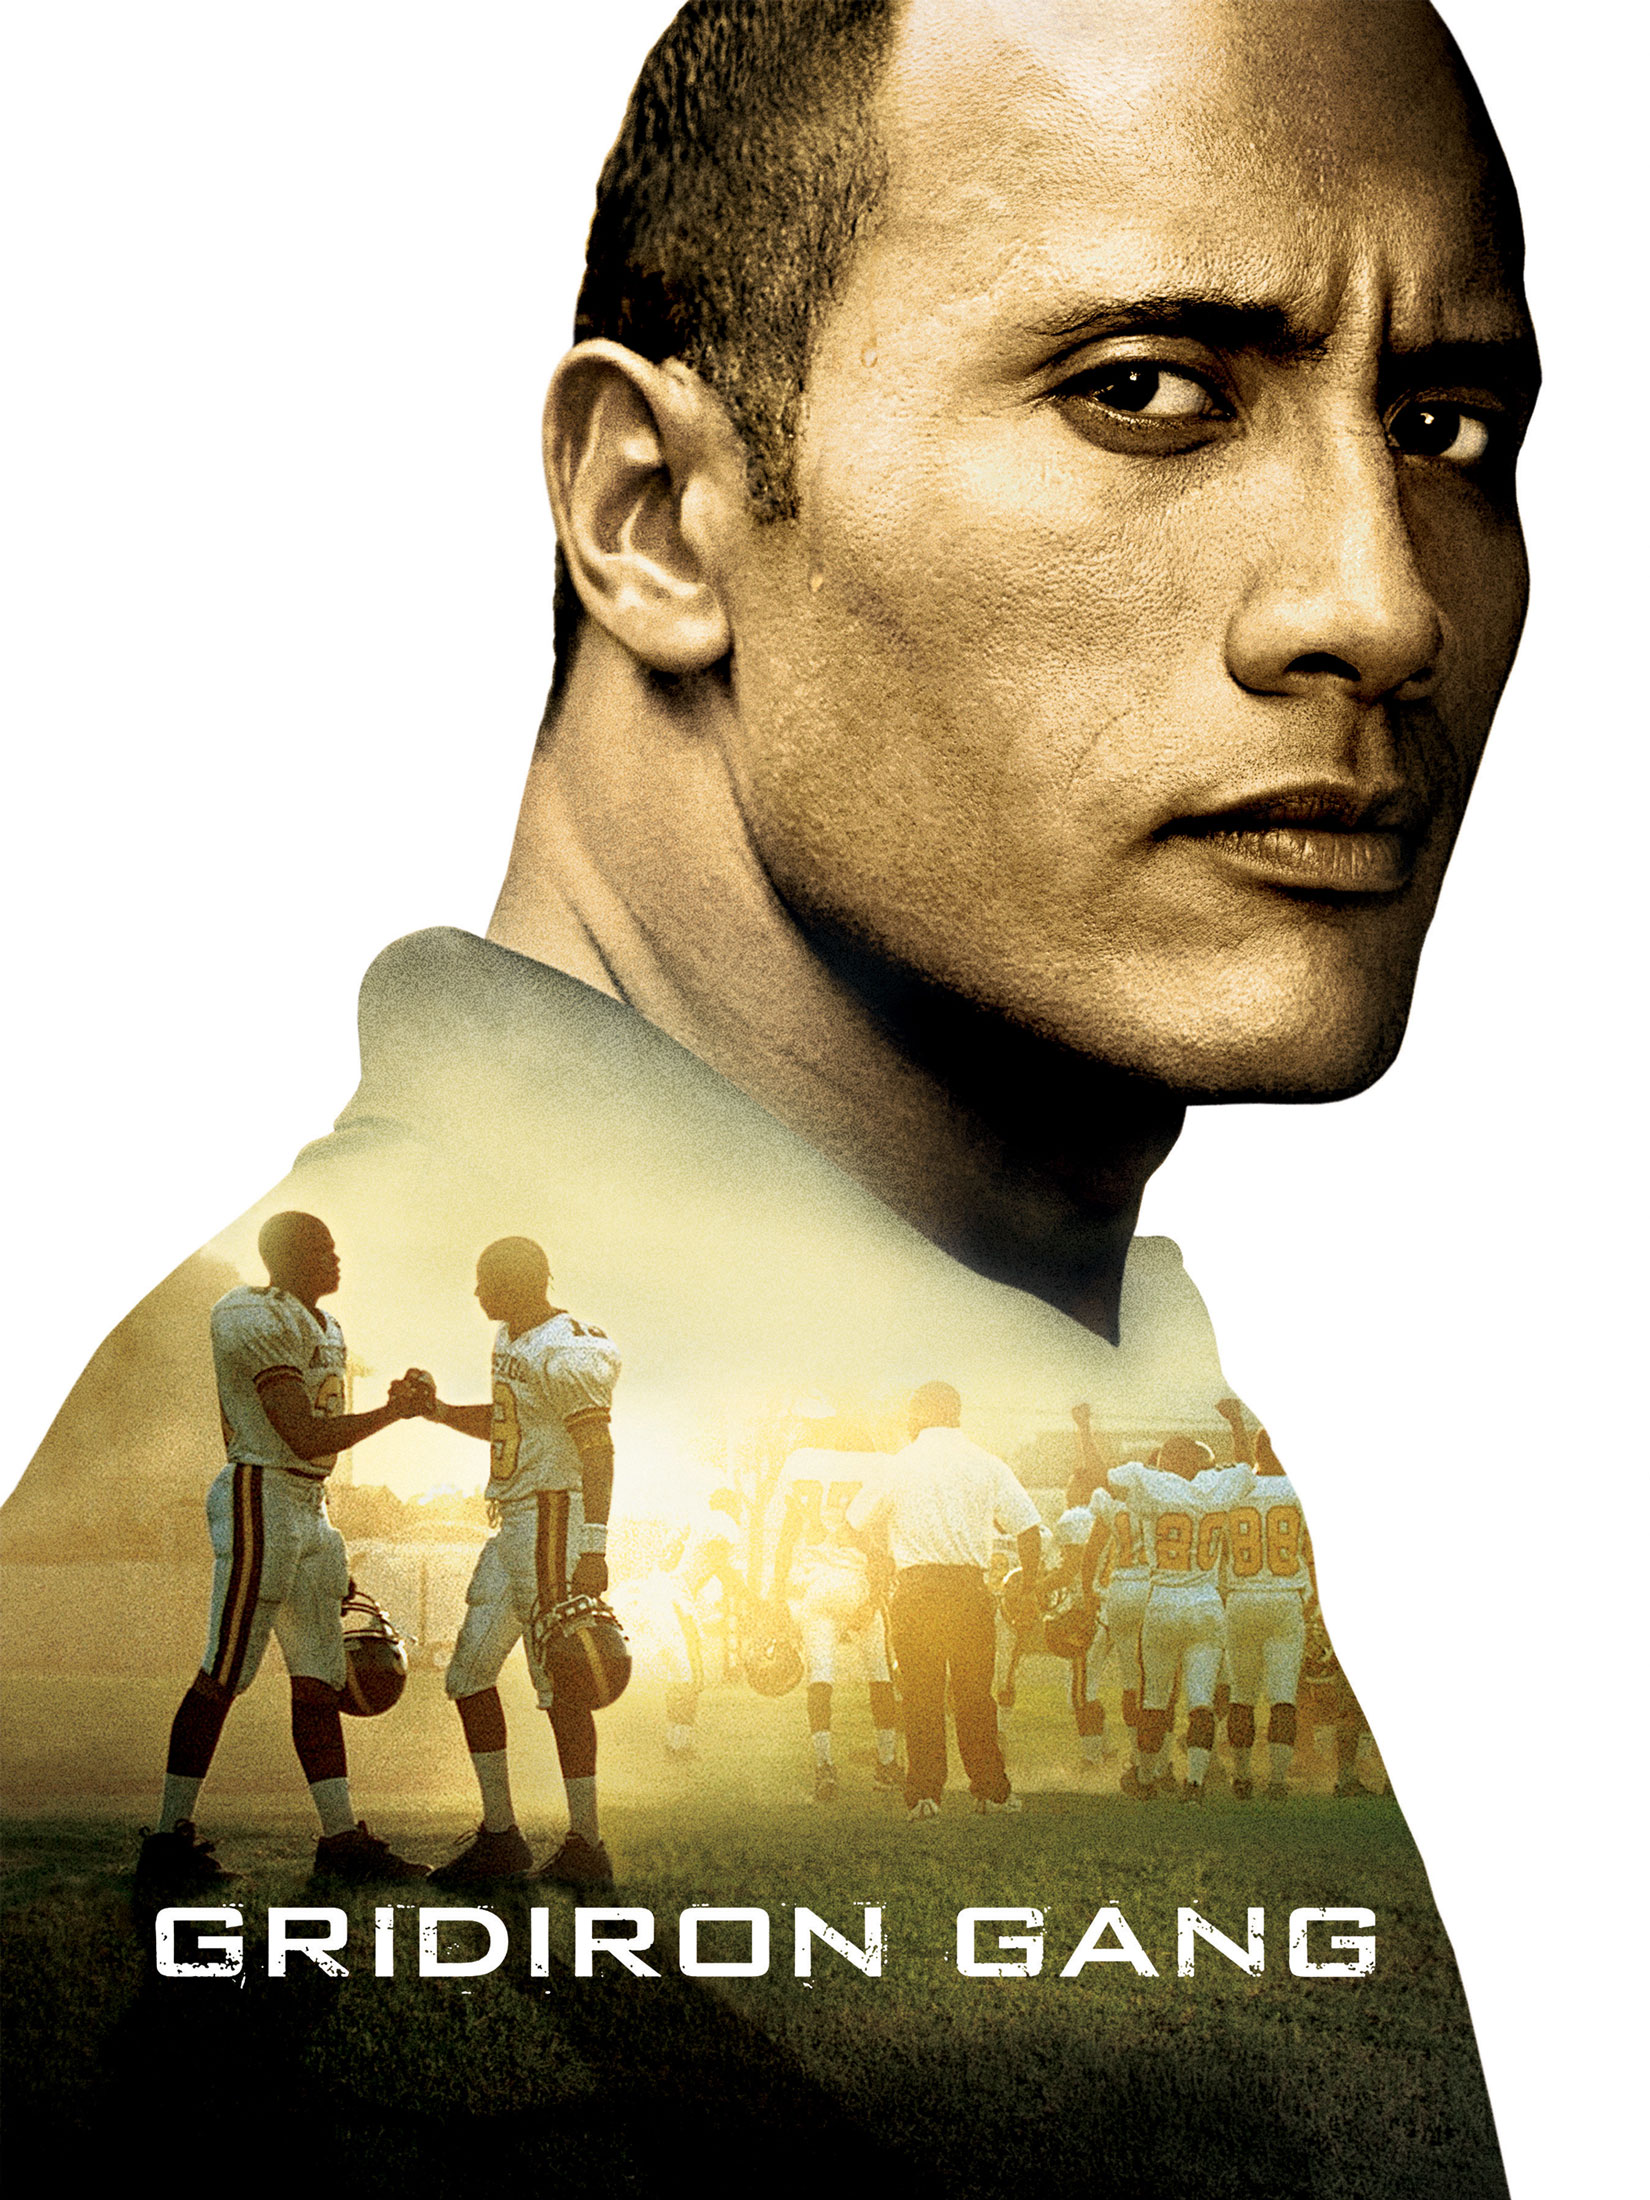 Gridiron Gang - Where to Watch and Stream